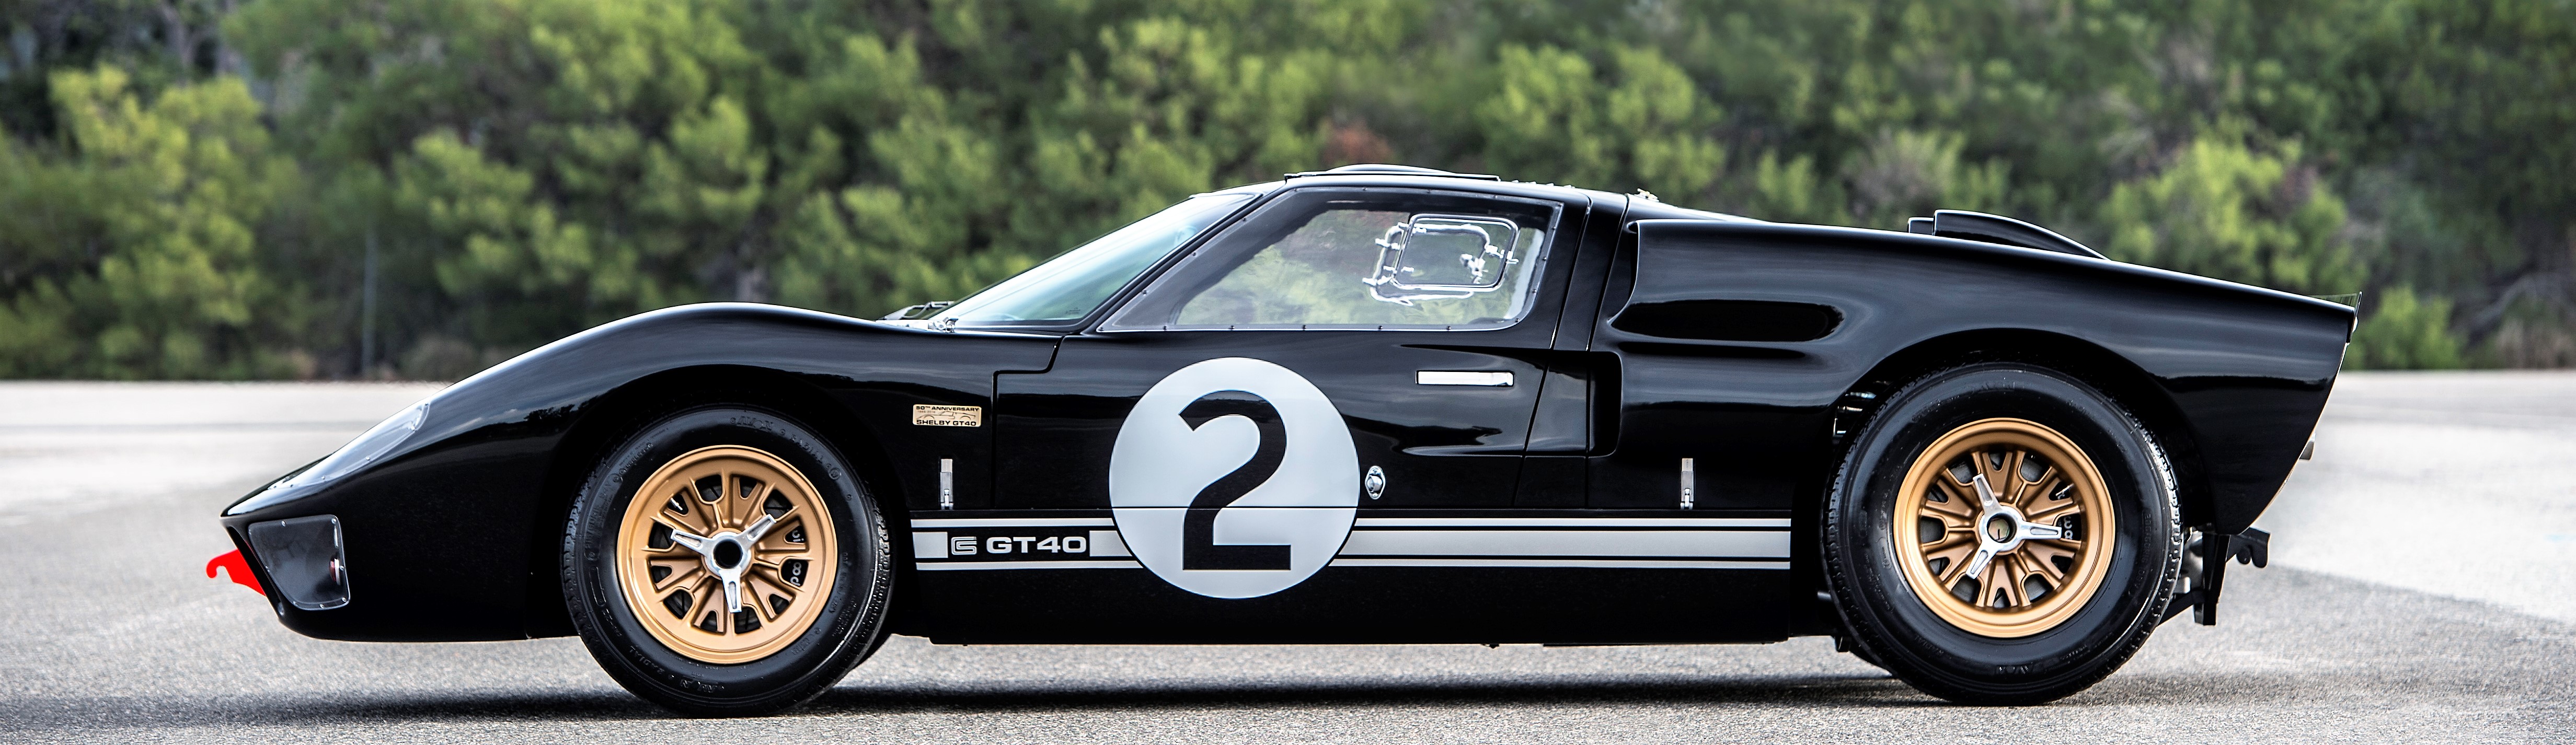 GT40 Shelby Edition